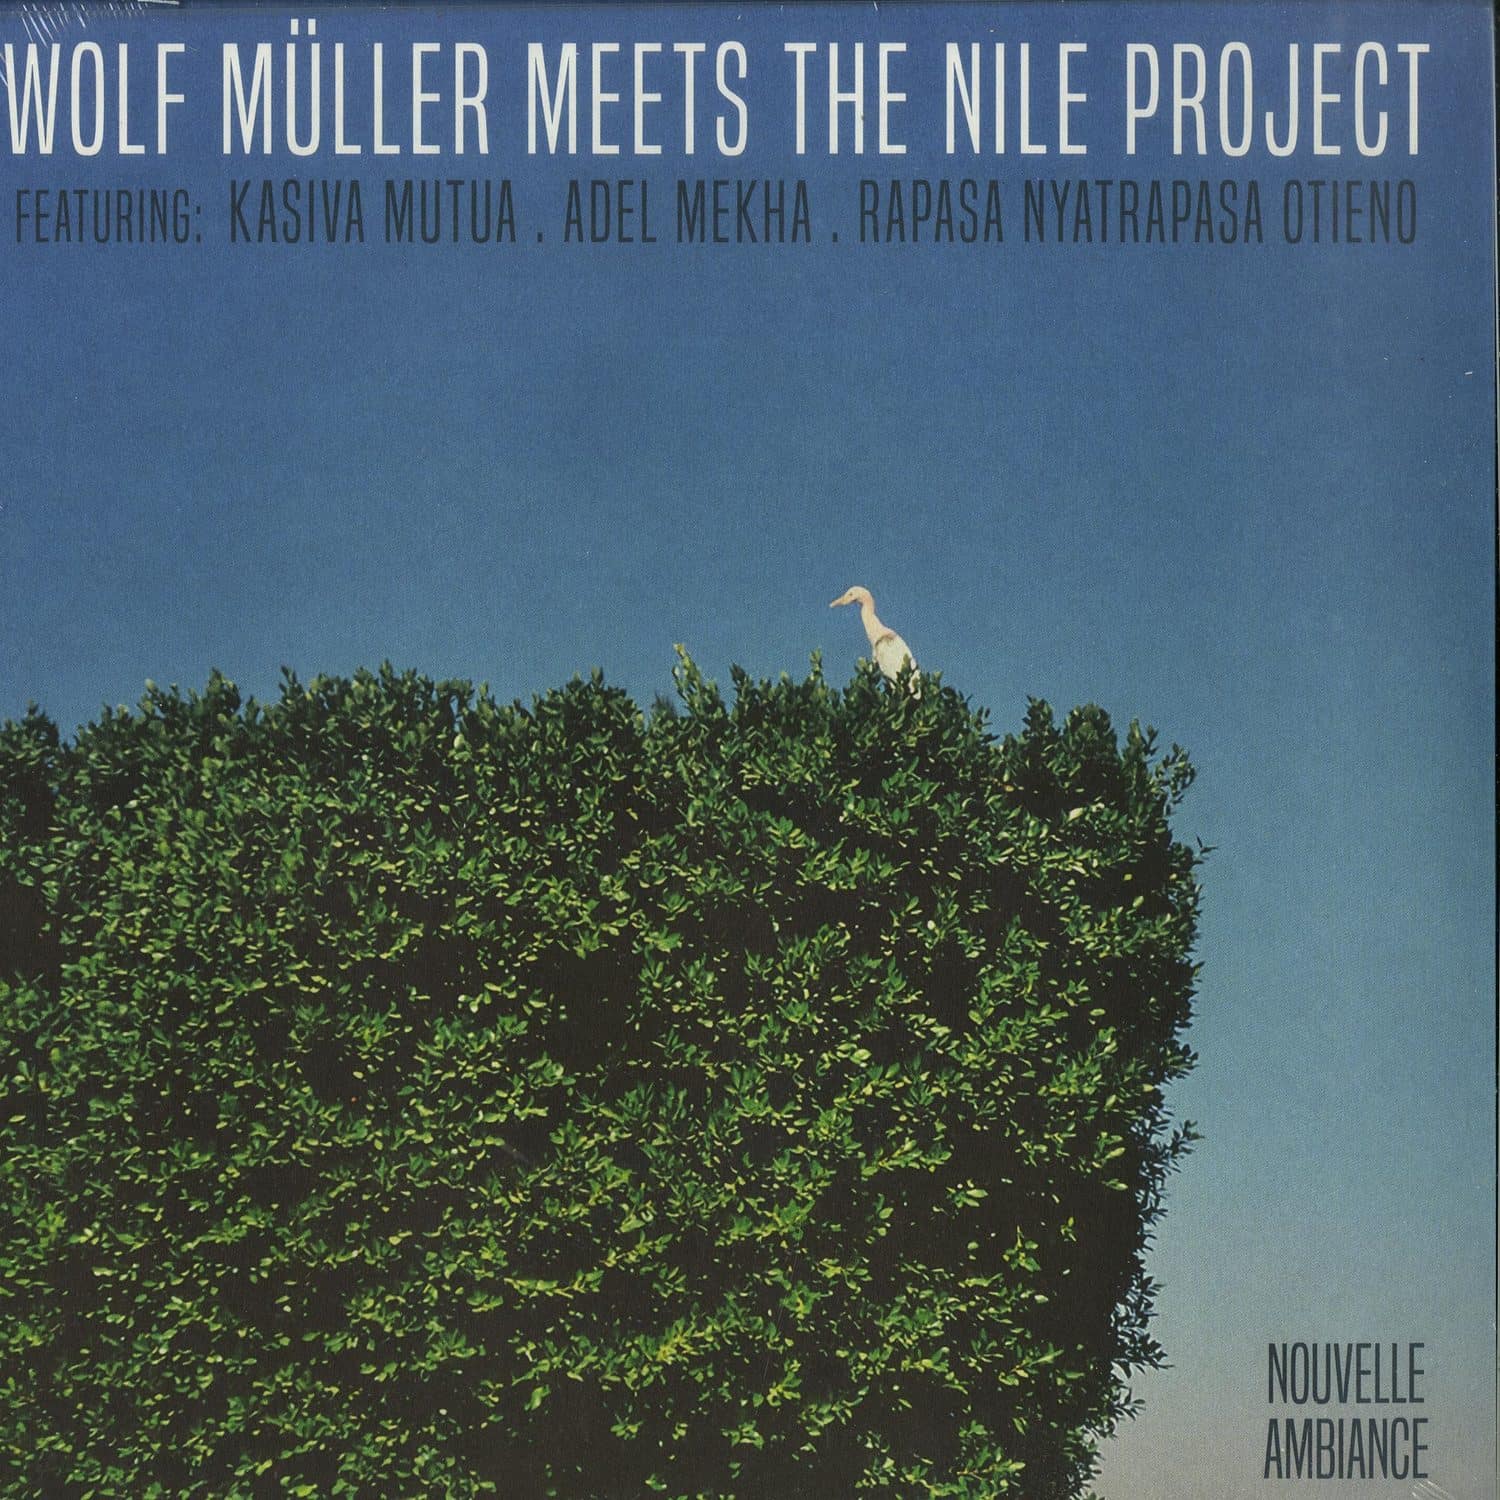 Wolf Mller Meets The Nile Project - WOLF MULLER MEETS THE NILE PROJECT EP